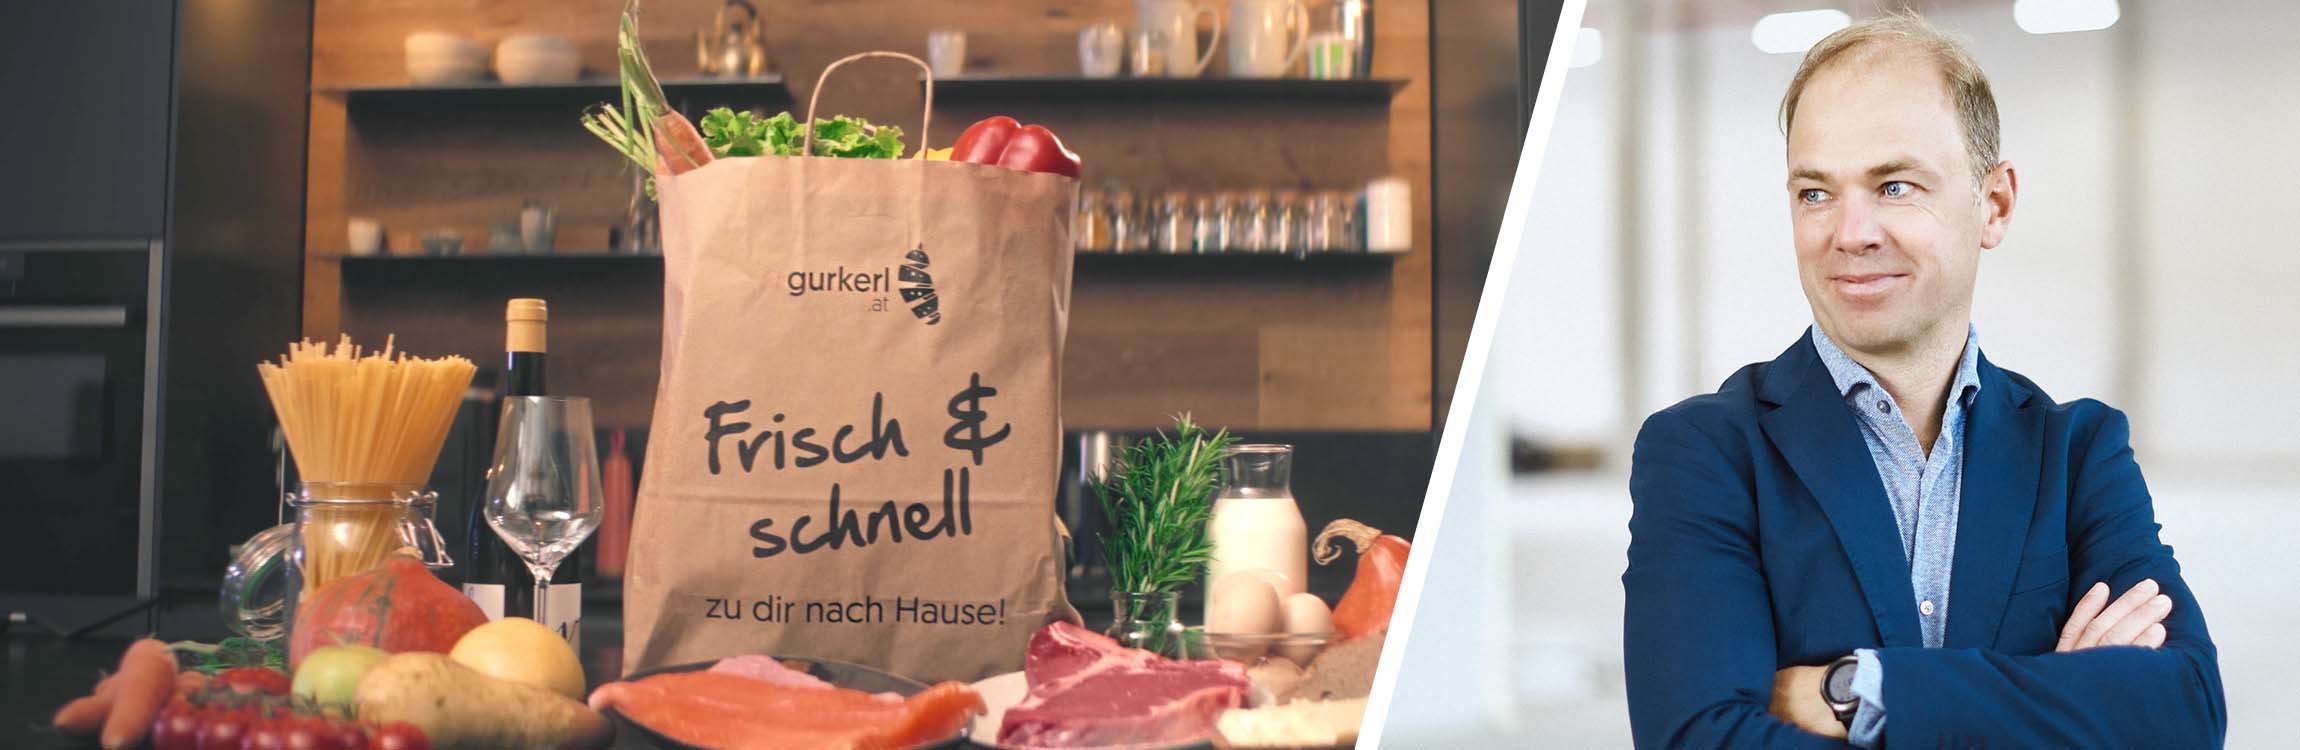 Gurkerl.at: fast and fresh online shopping with service automation.